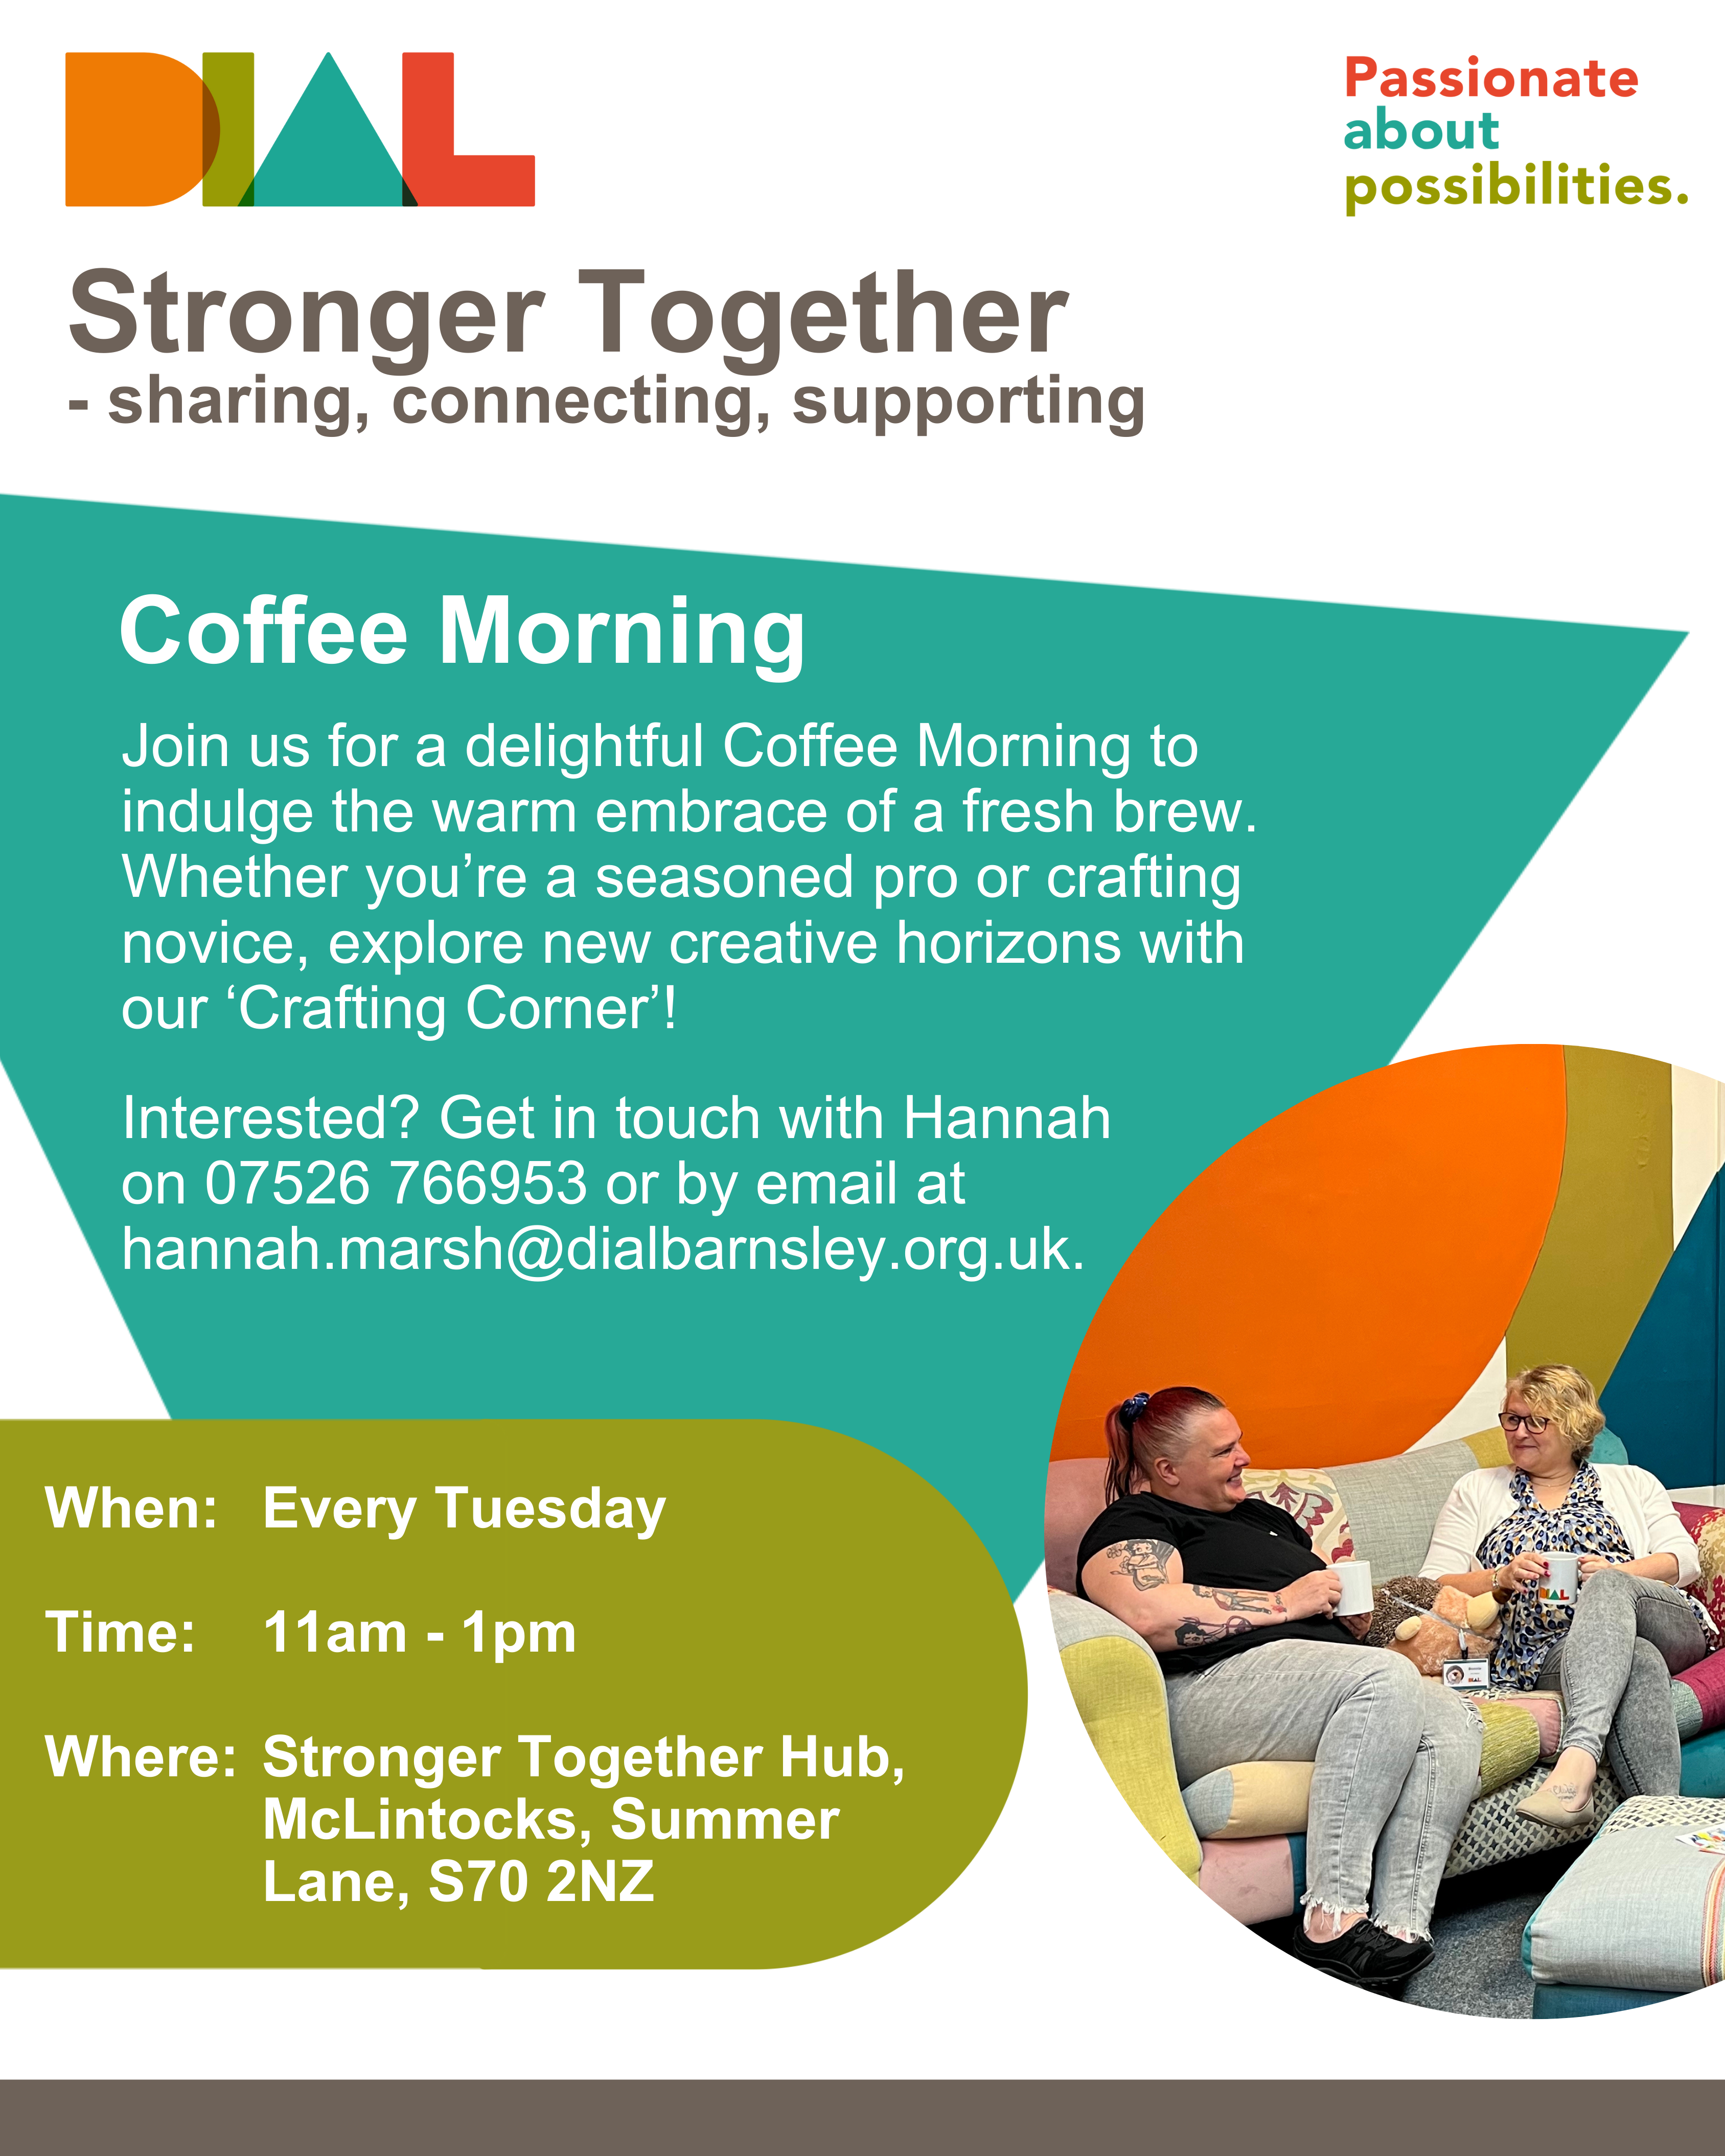 A poster for our Stronger Together Coffee Mornings. A white background and using DIAL colours of orange, green, teal and red. The poster includes the DIAL logo, each letter of DIAL being a different DIAL colour, and the tagline of ‘Passionate About Possibilities’. There is also an image of two white women sitting on the colourful patchwork sofa in our Stronger Together Hub, having a cuppa and chatting. The poster reads: Stronger Together - sharing, connecting, supporting. Join us for a delightful coffee morning to indulge the warm embrace of a fresh brew. Whether you’re a seasoned pro or crafting novice, explore new creative horizons with our ‘Crafting Corner’! Interested? Get in touch with Hannah on 07526 766953 or by email at hannah.marsh@dialbarnsley.org.uk. When: Weekly on a Tuesday, 11am - 1pm. Where: Stronger Together Hub, DIAL Office, McLintocks, Summer Lane, S70 2NZ.